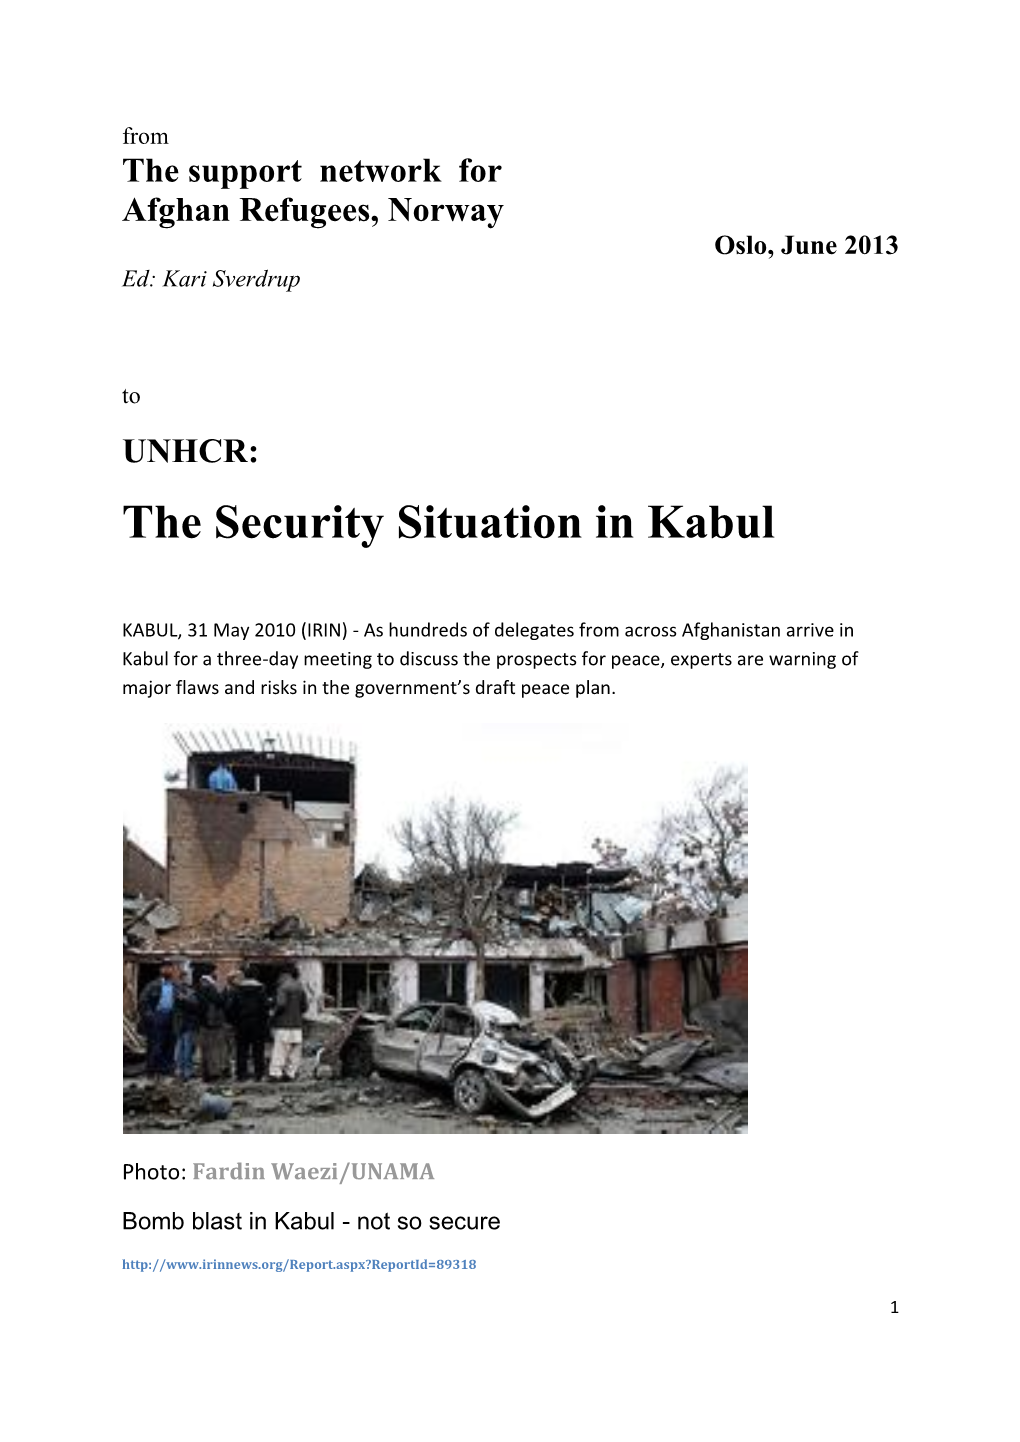 The Security Situation in Kabul